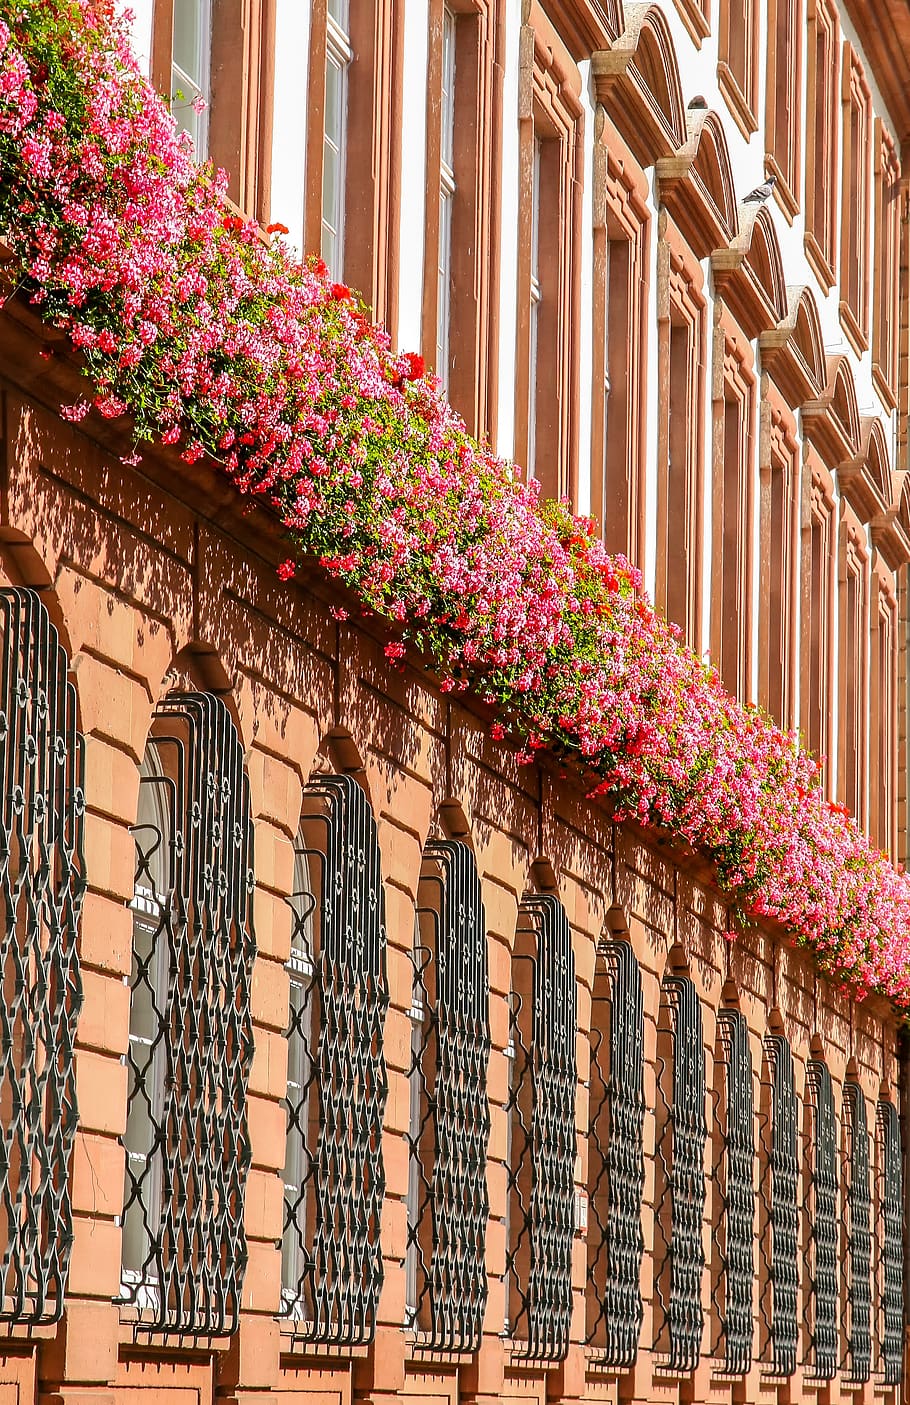 architecture, facade, outdoor, house, building, flowers, blütenmeer, pink, red, green